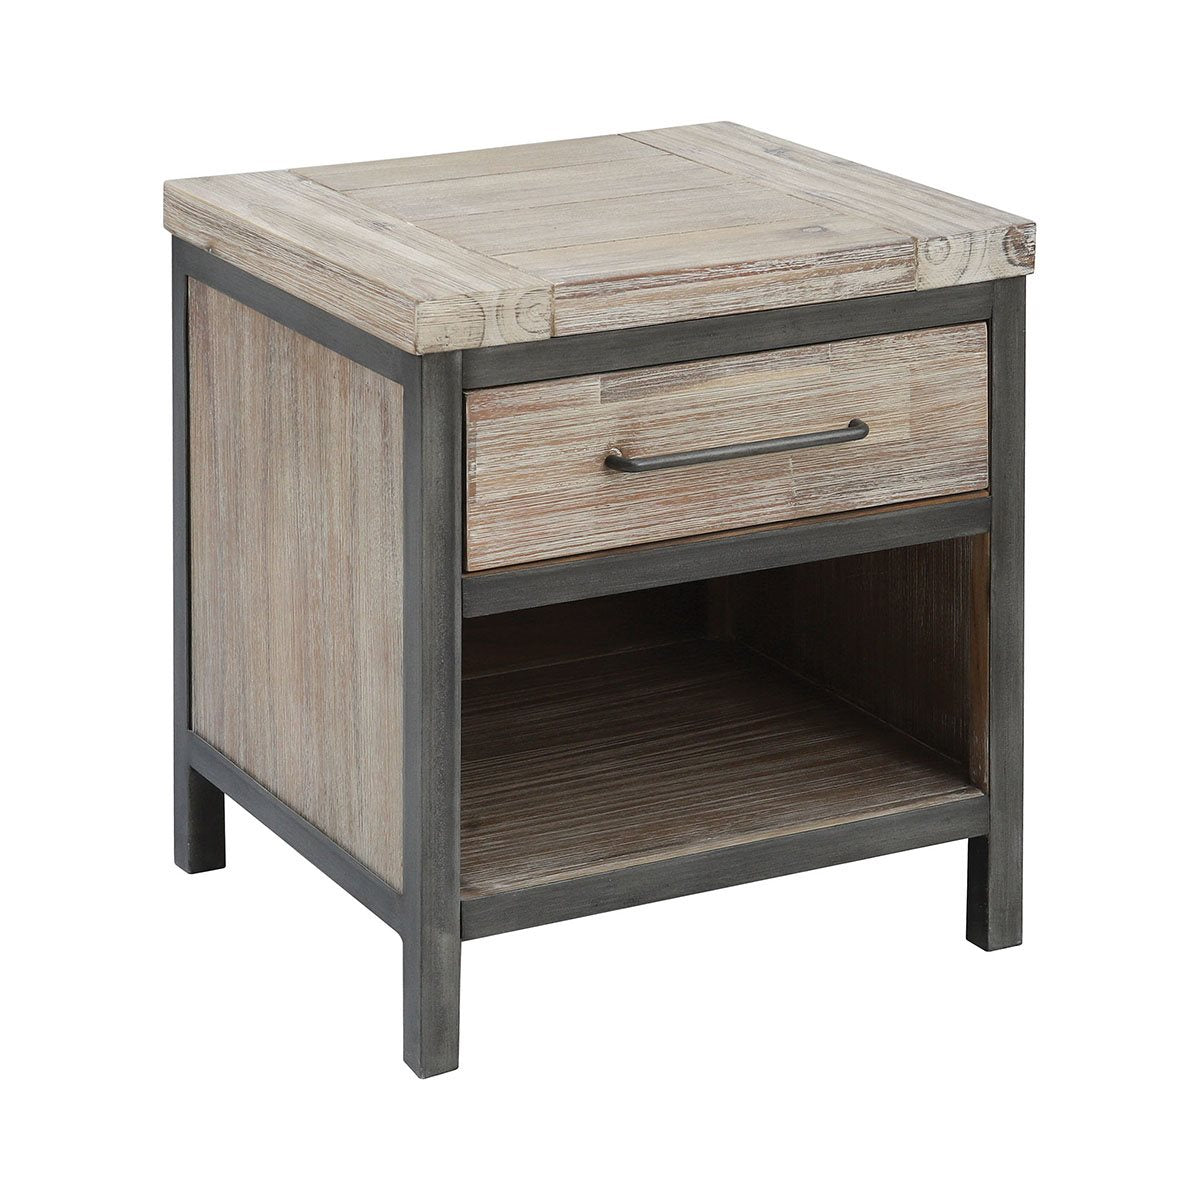 Stein World Cork County Drawer Accent Table 17363